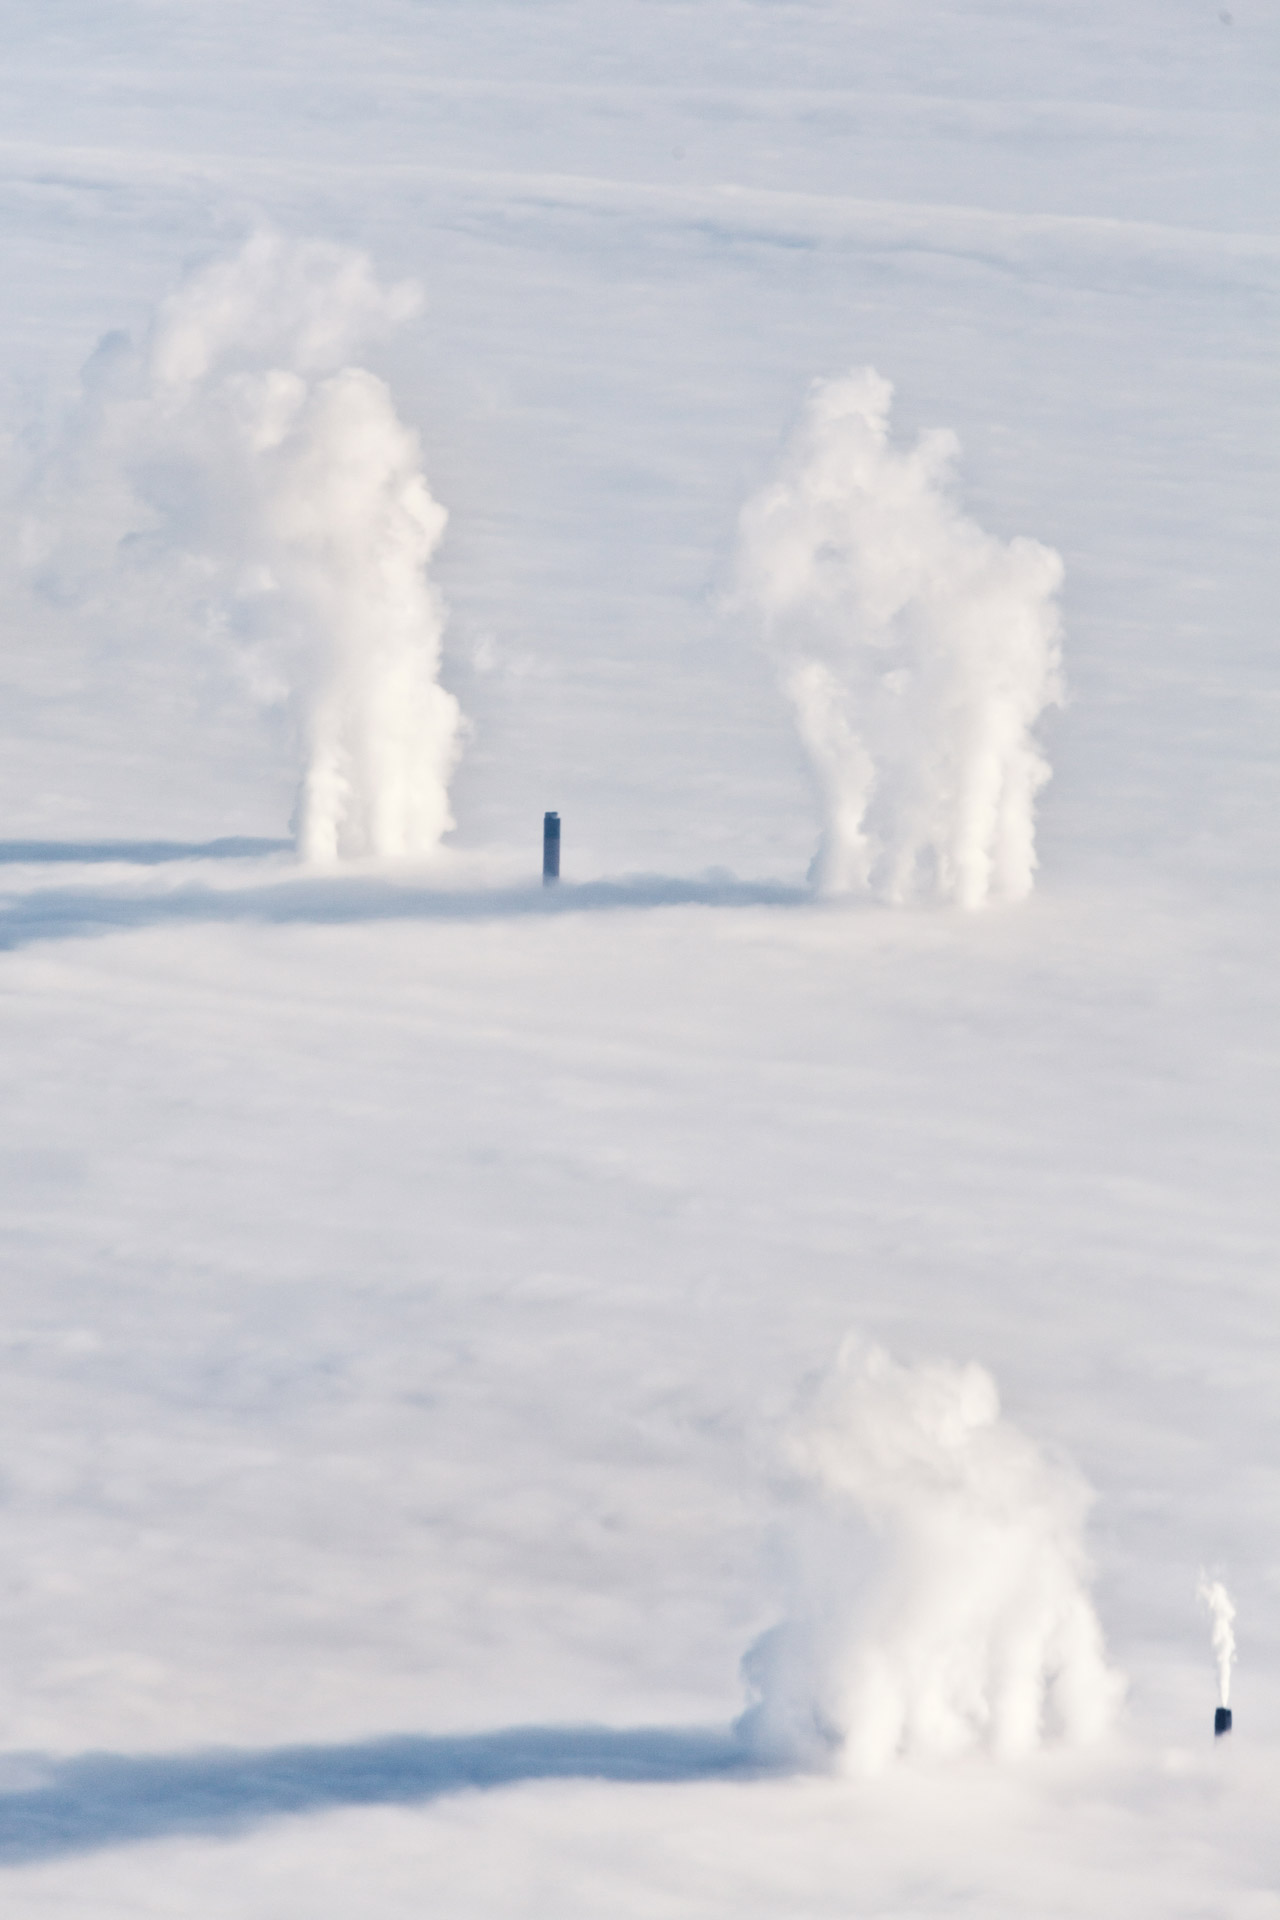 factory chimneys during weather inversion